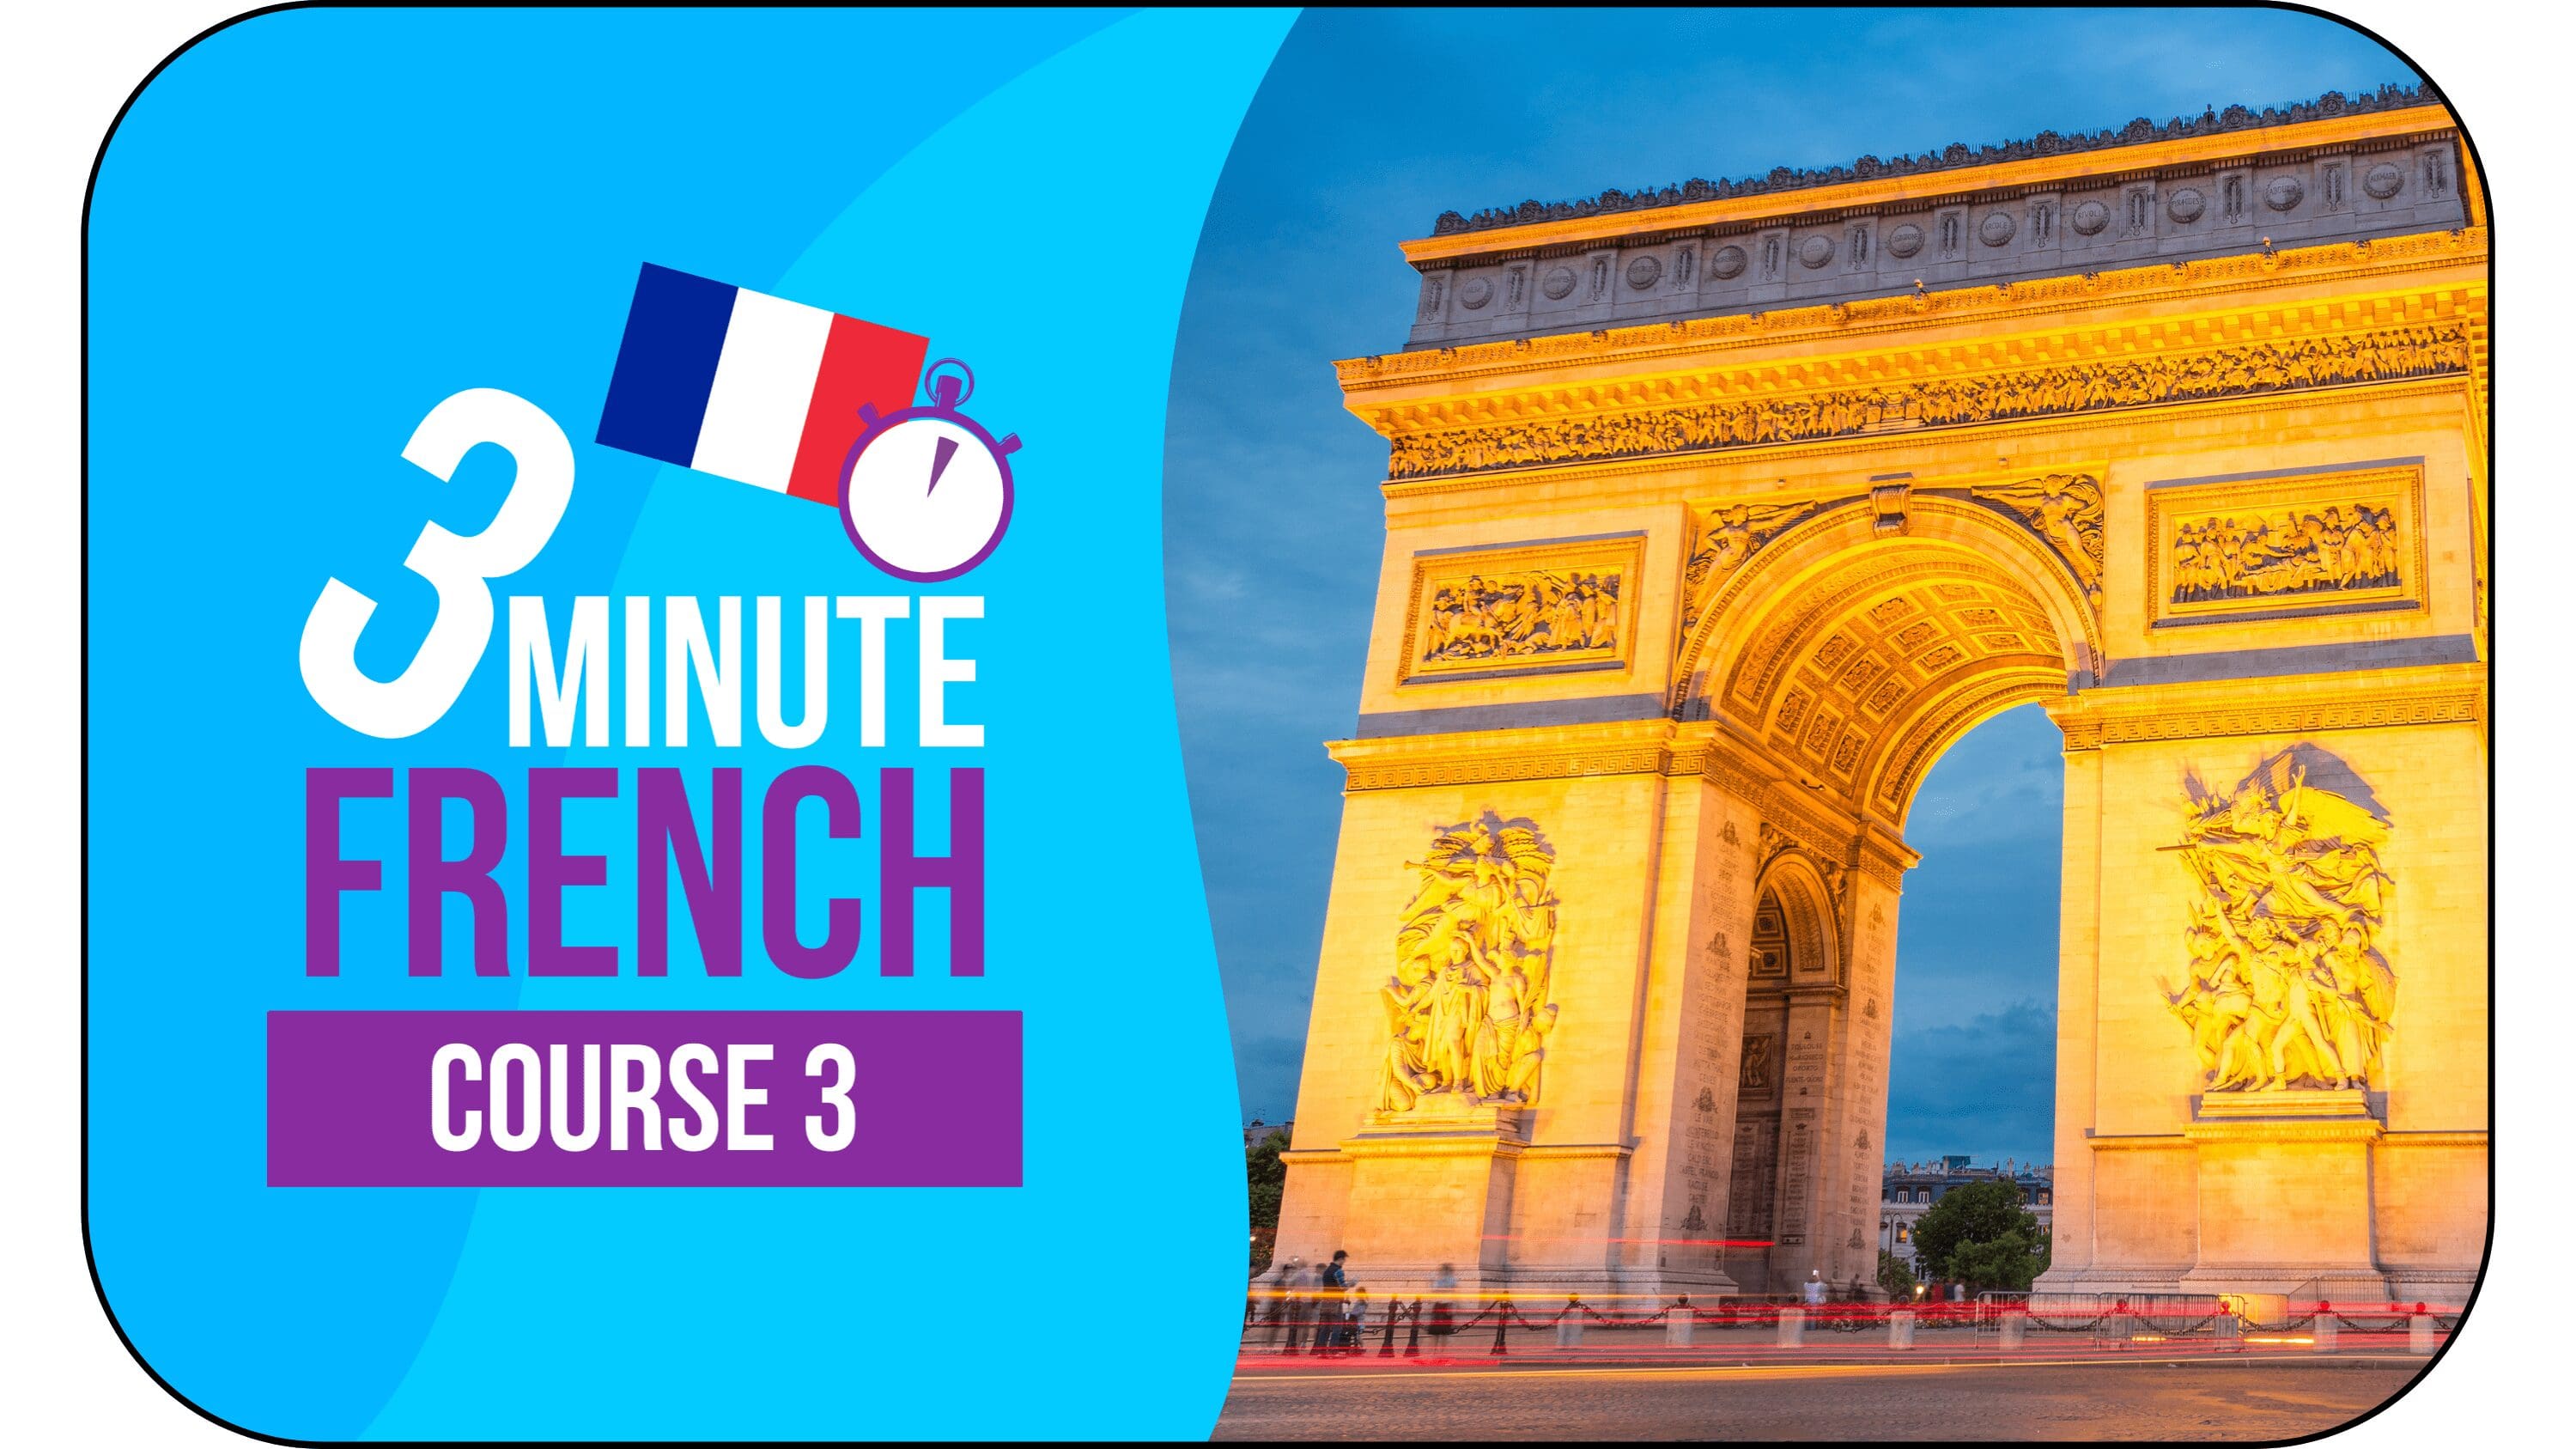 3 Minute French - Course 3